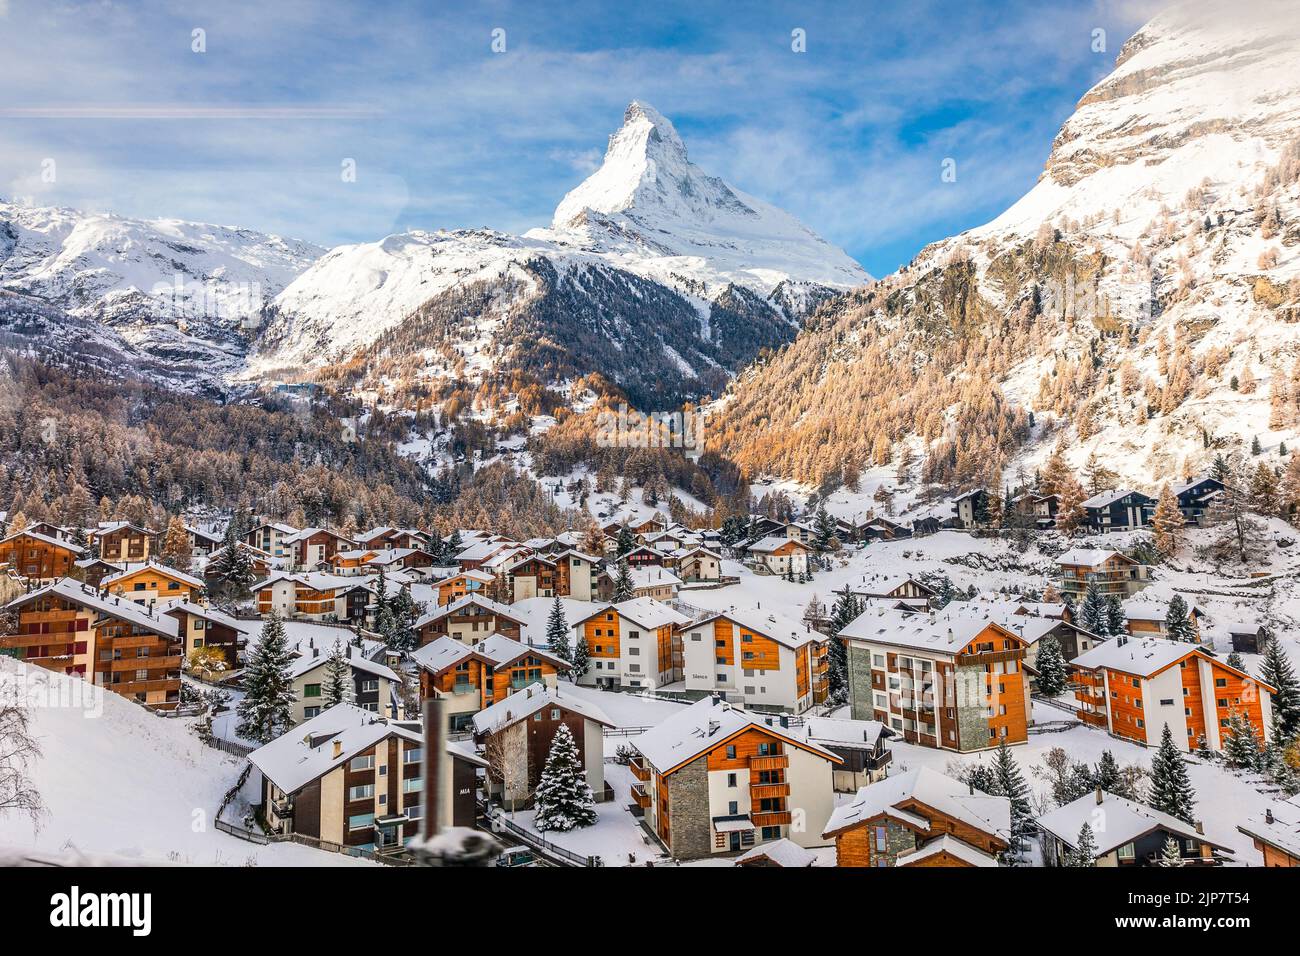 Zermatt, Switzerland - November 12, 2019: Aerial view of snowcapped village with background of iconic mountain peak Matterhorn, some hotels are closed Stock Photo